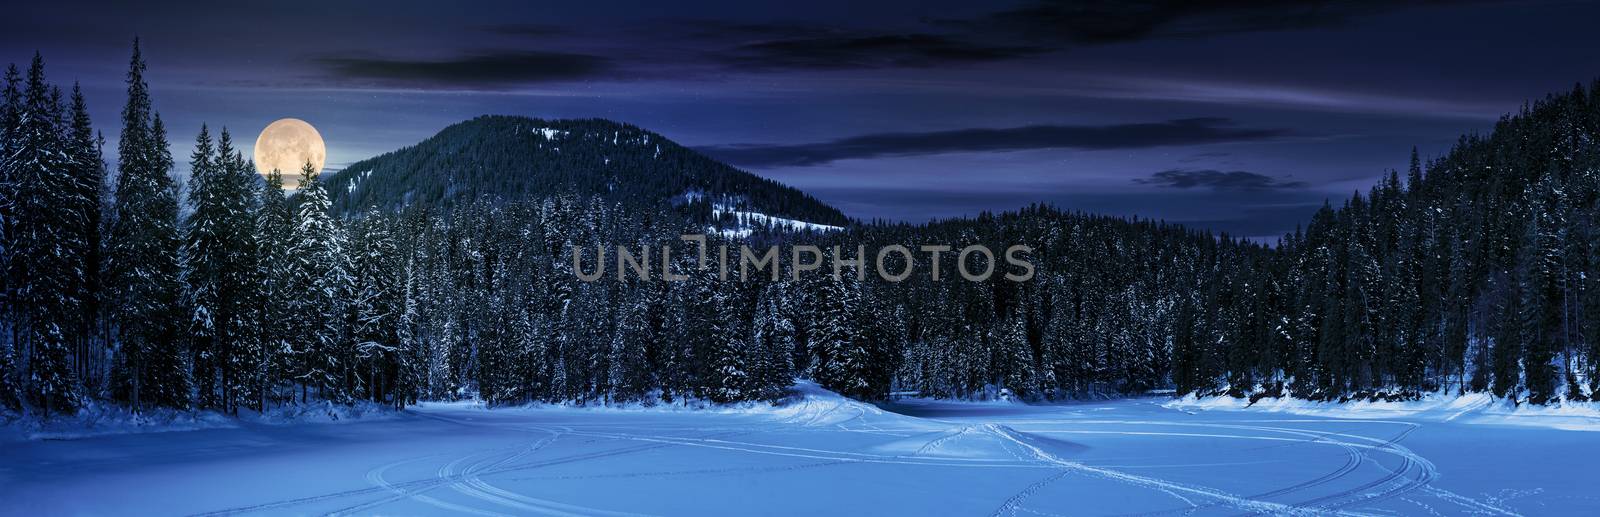 snowy meadow in spruce forest at night in full moon light. location lake Synevyr Ukraine, frozen in winter. beautiful nature panoramic landscape in Carpathian mountains